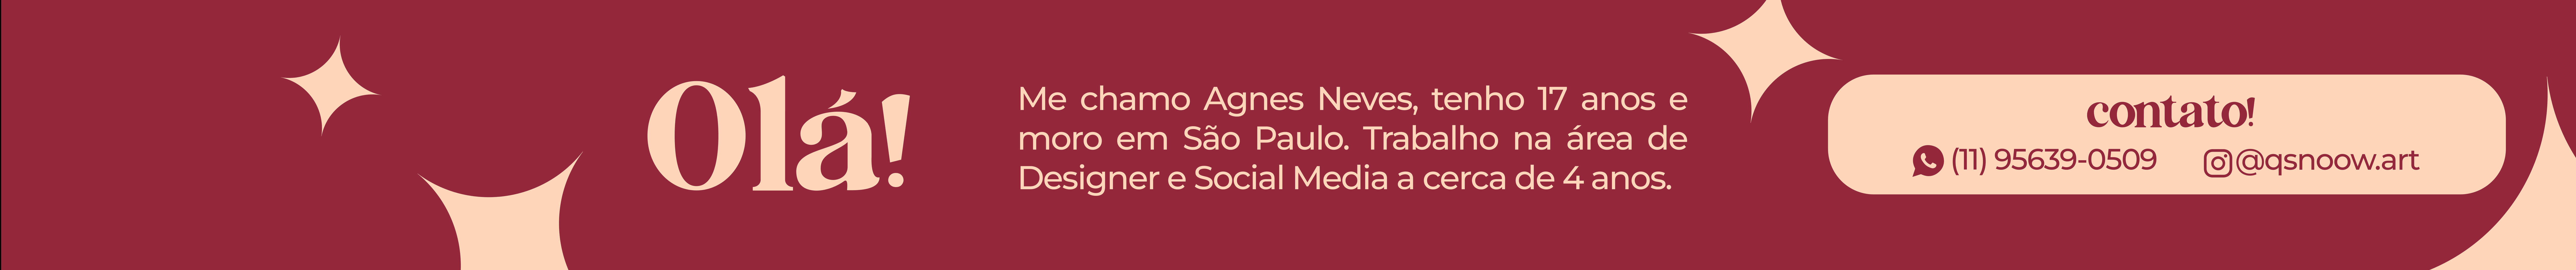 Agnes Neves's profile banner